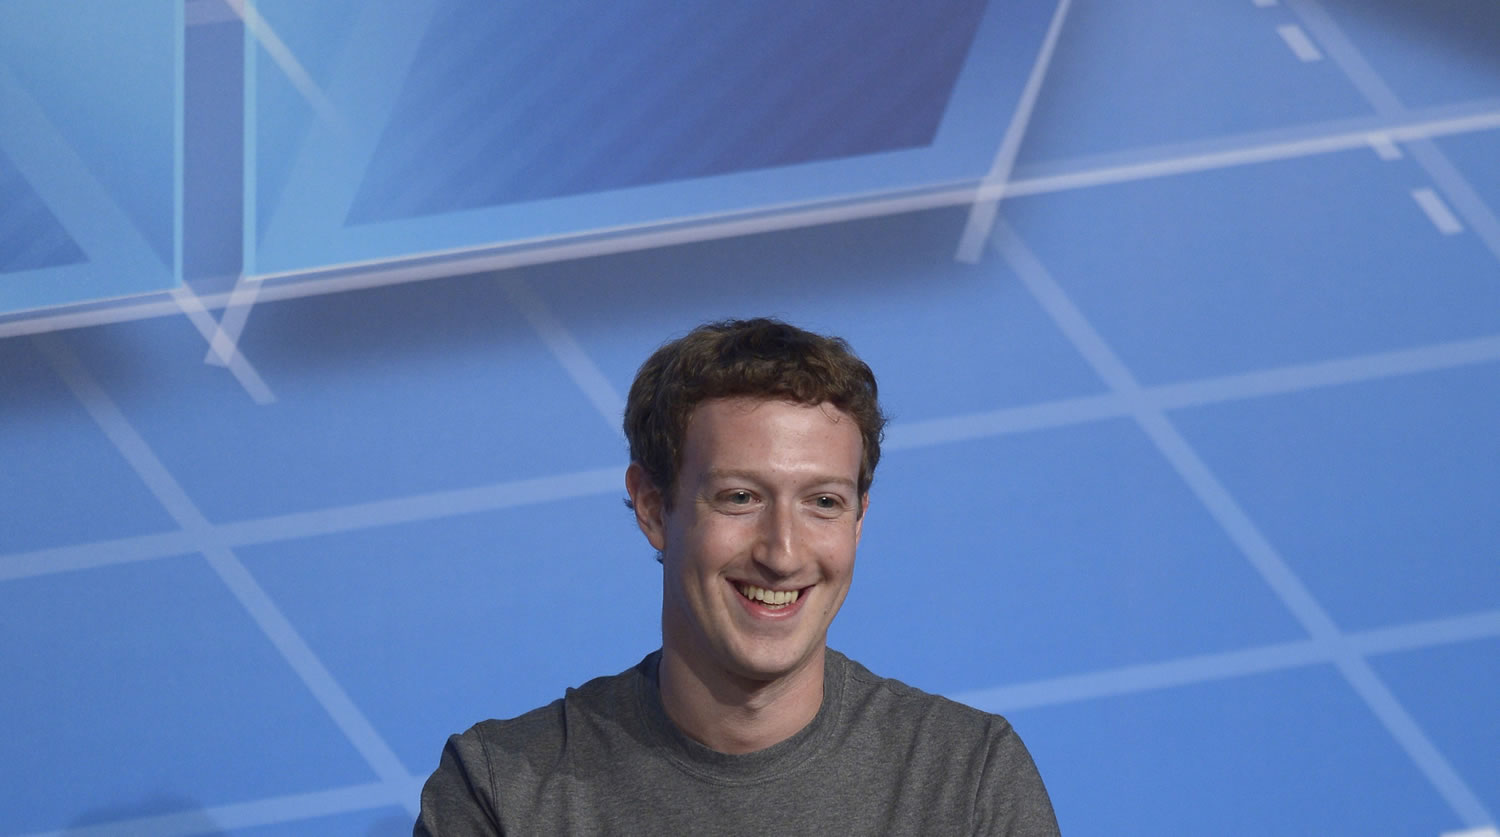 Facebook Chairman and CEO Mark Zuckerberg during a conference in Barcelona, Spain.